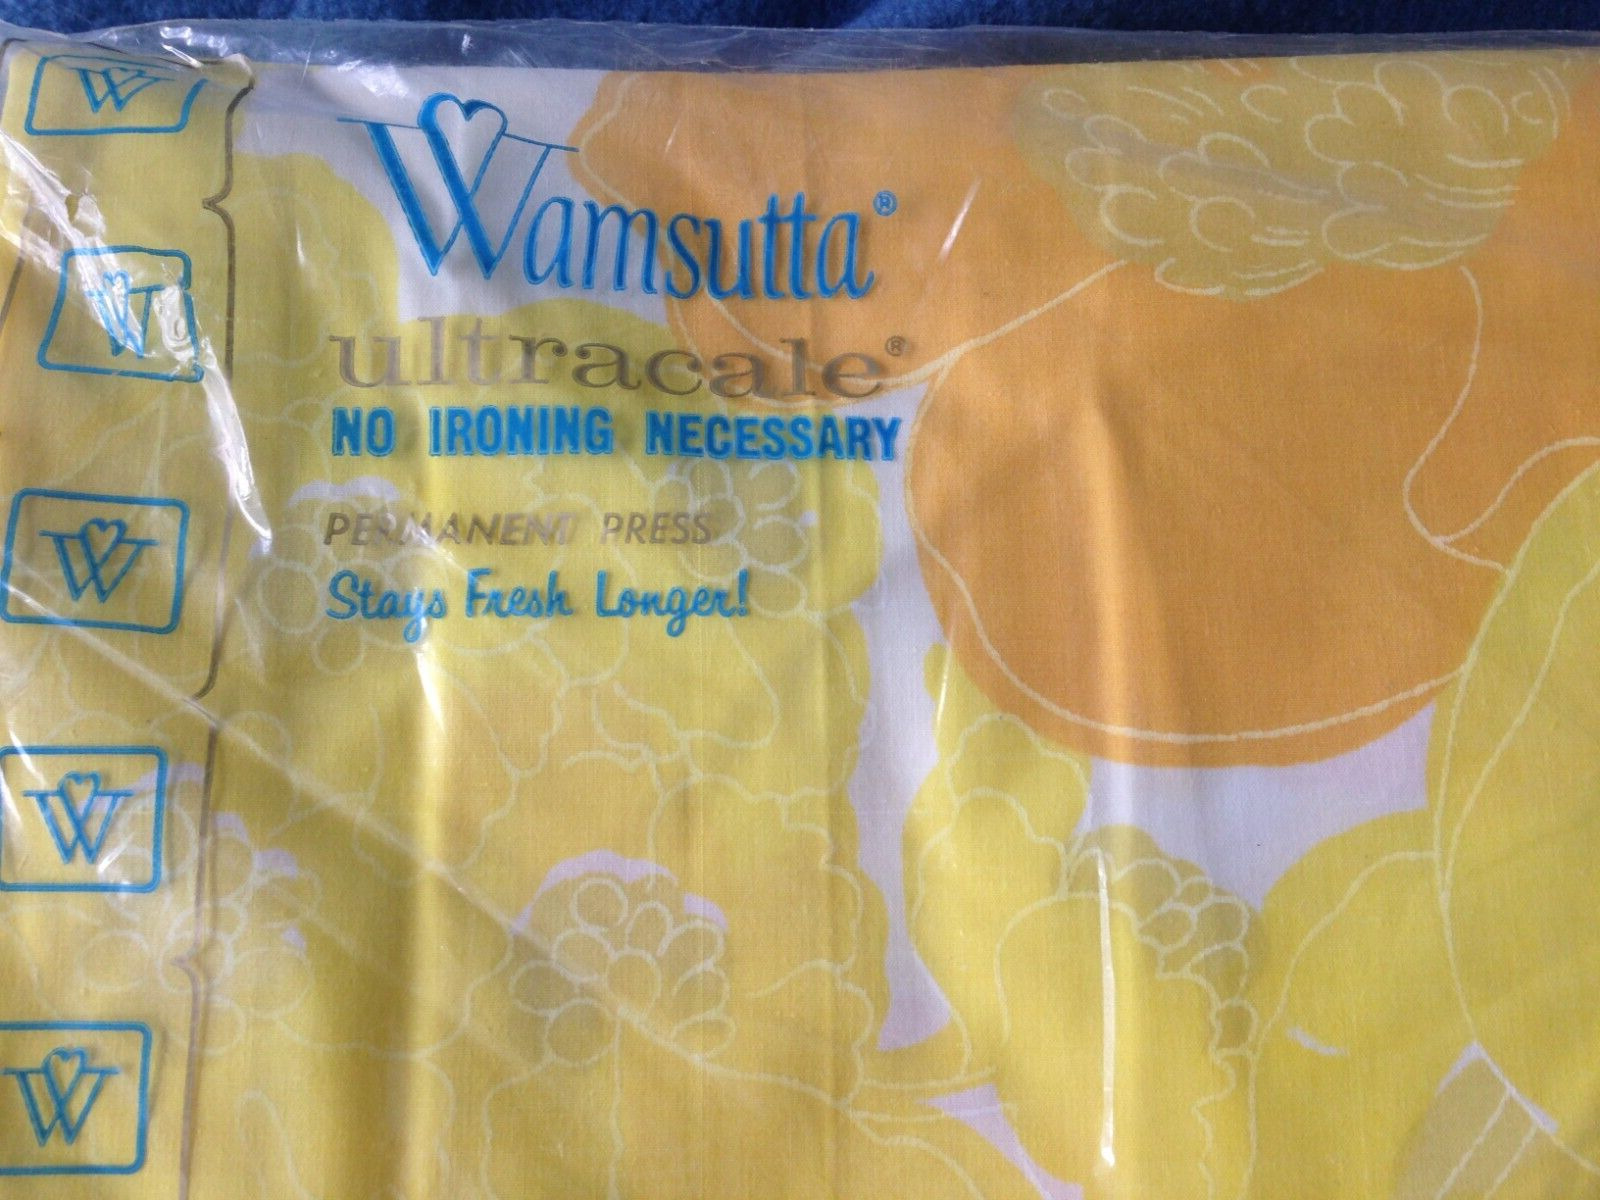 NEW-Vintage-Wamsutta- Supercale Twin Bed Sheet Set from the 1980\'s- 3-piece set.